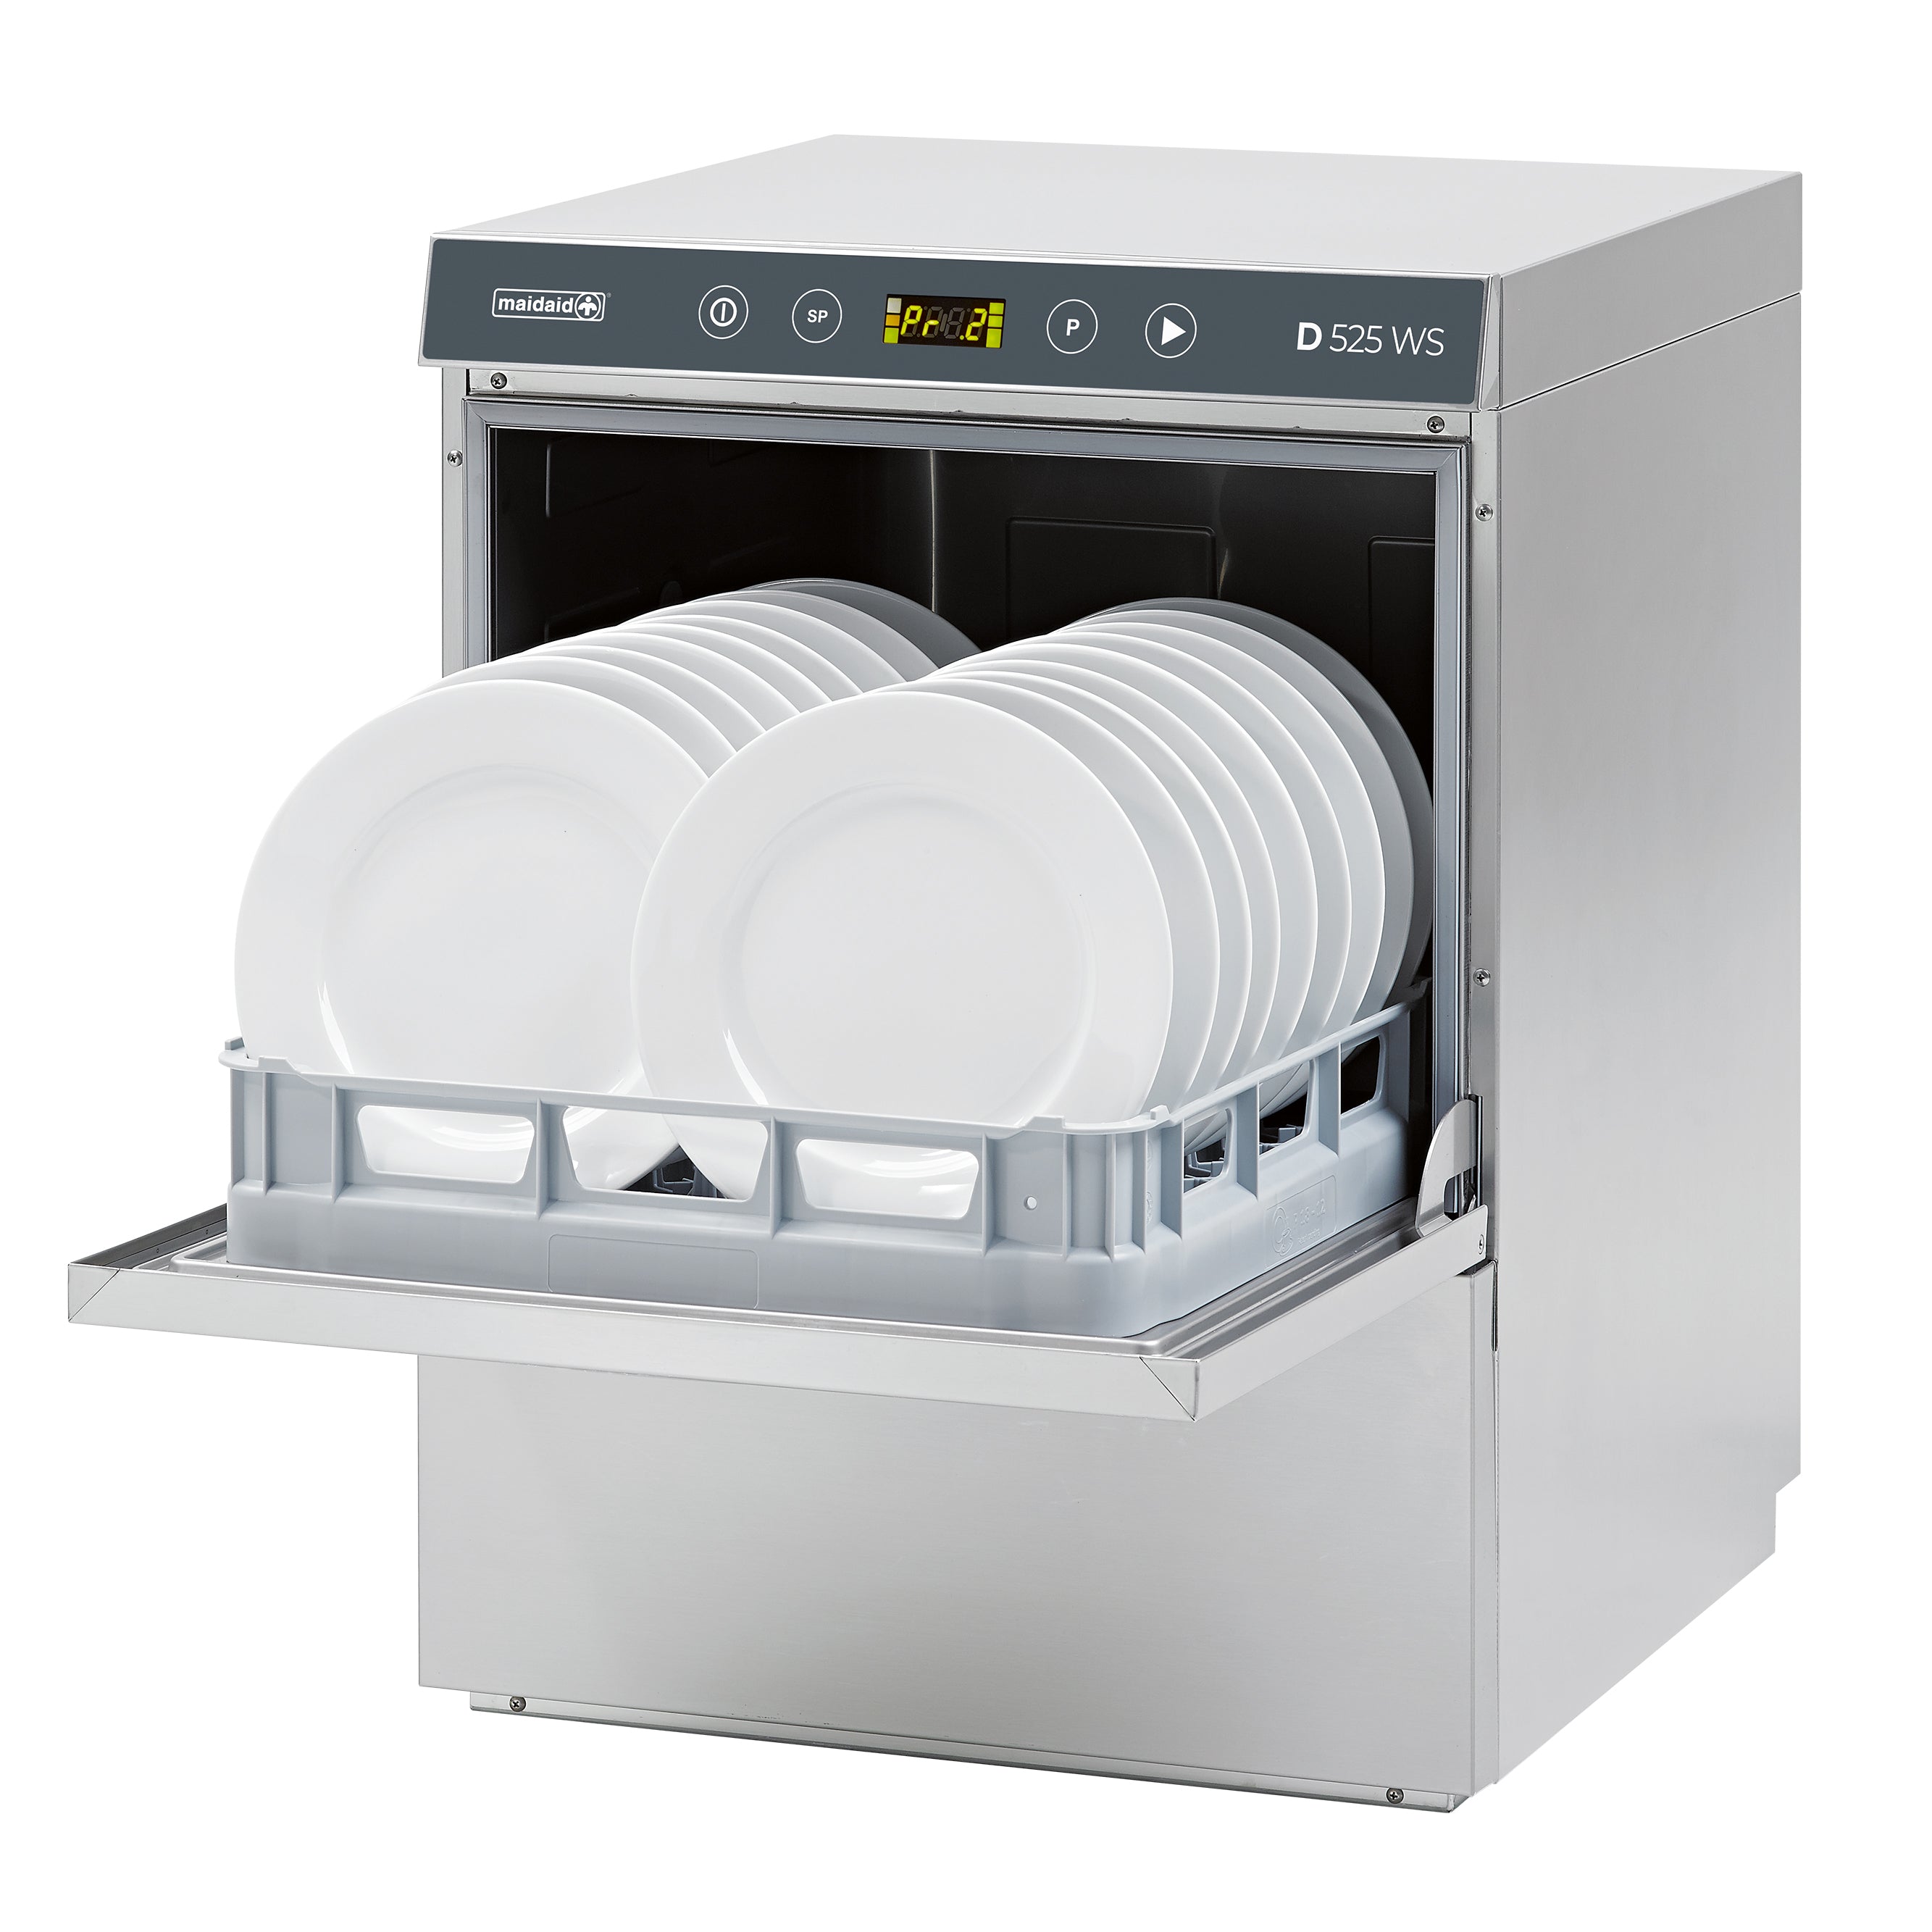 Maidaid D525WS Dishwasher/Glasswasher JD Catering Equipment Solutions Ltd